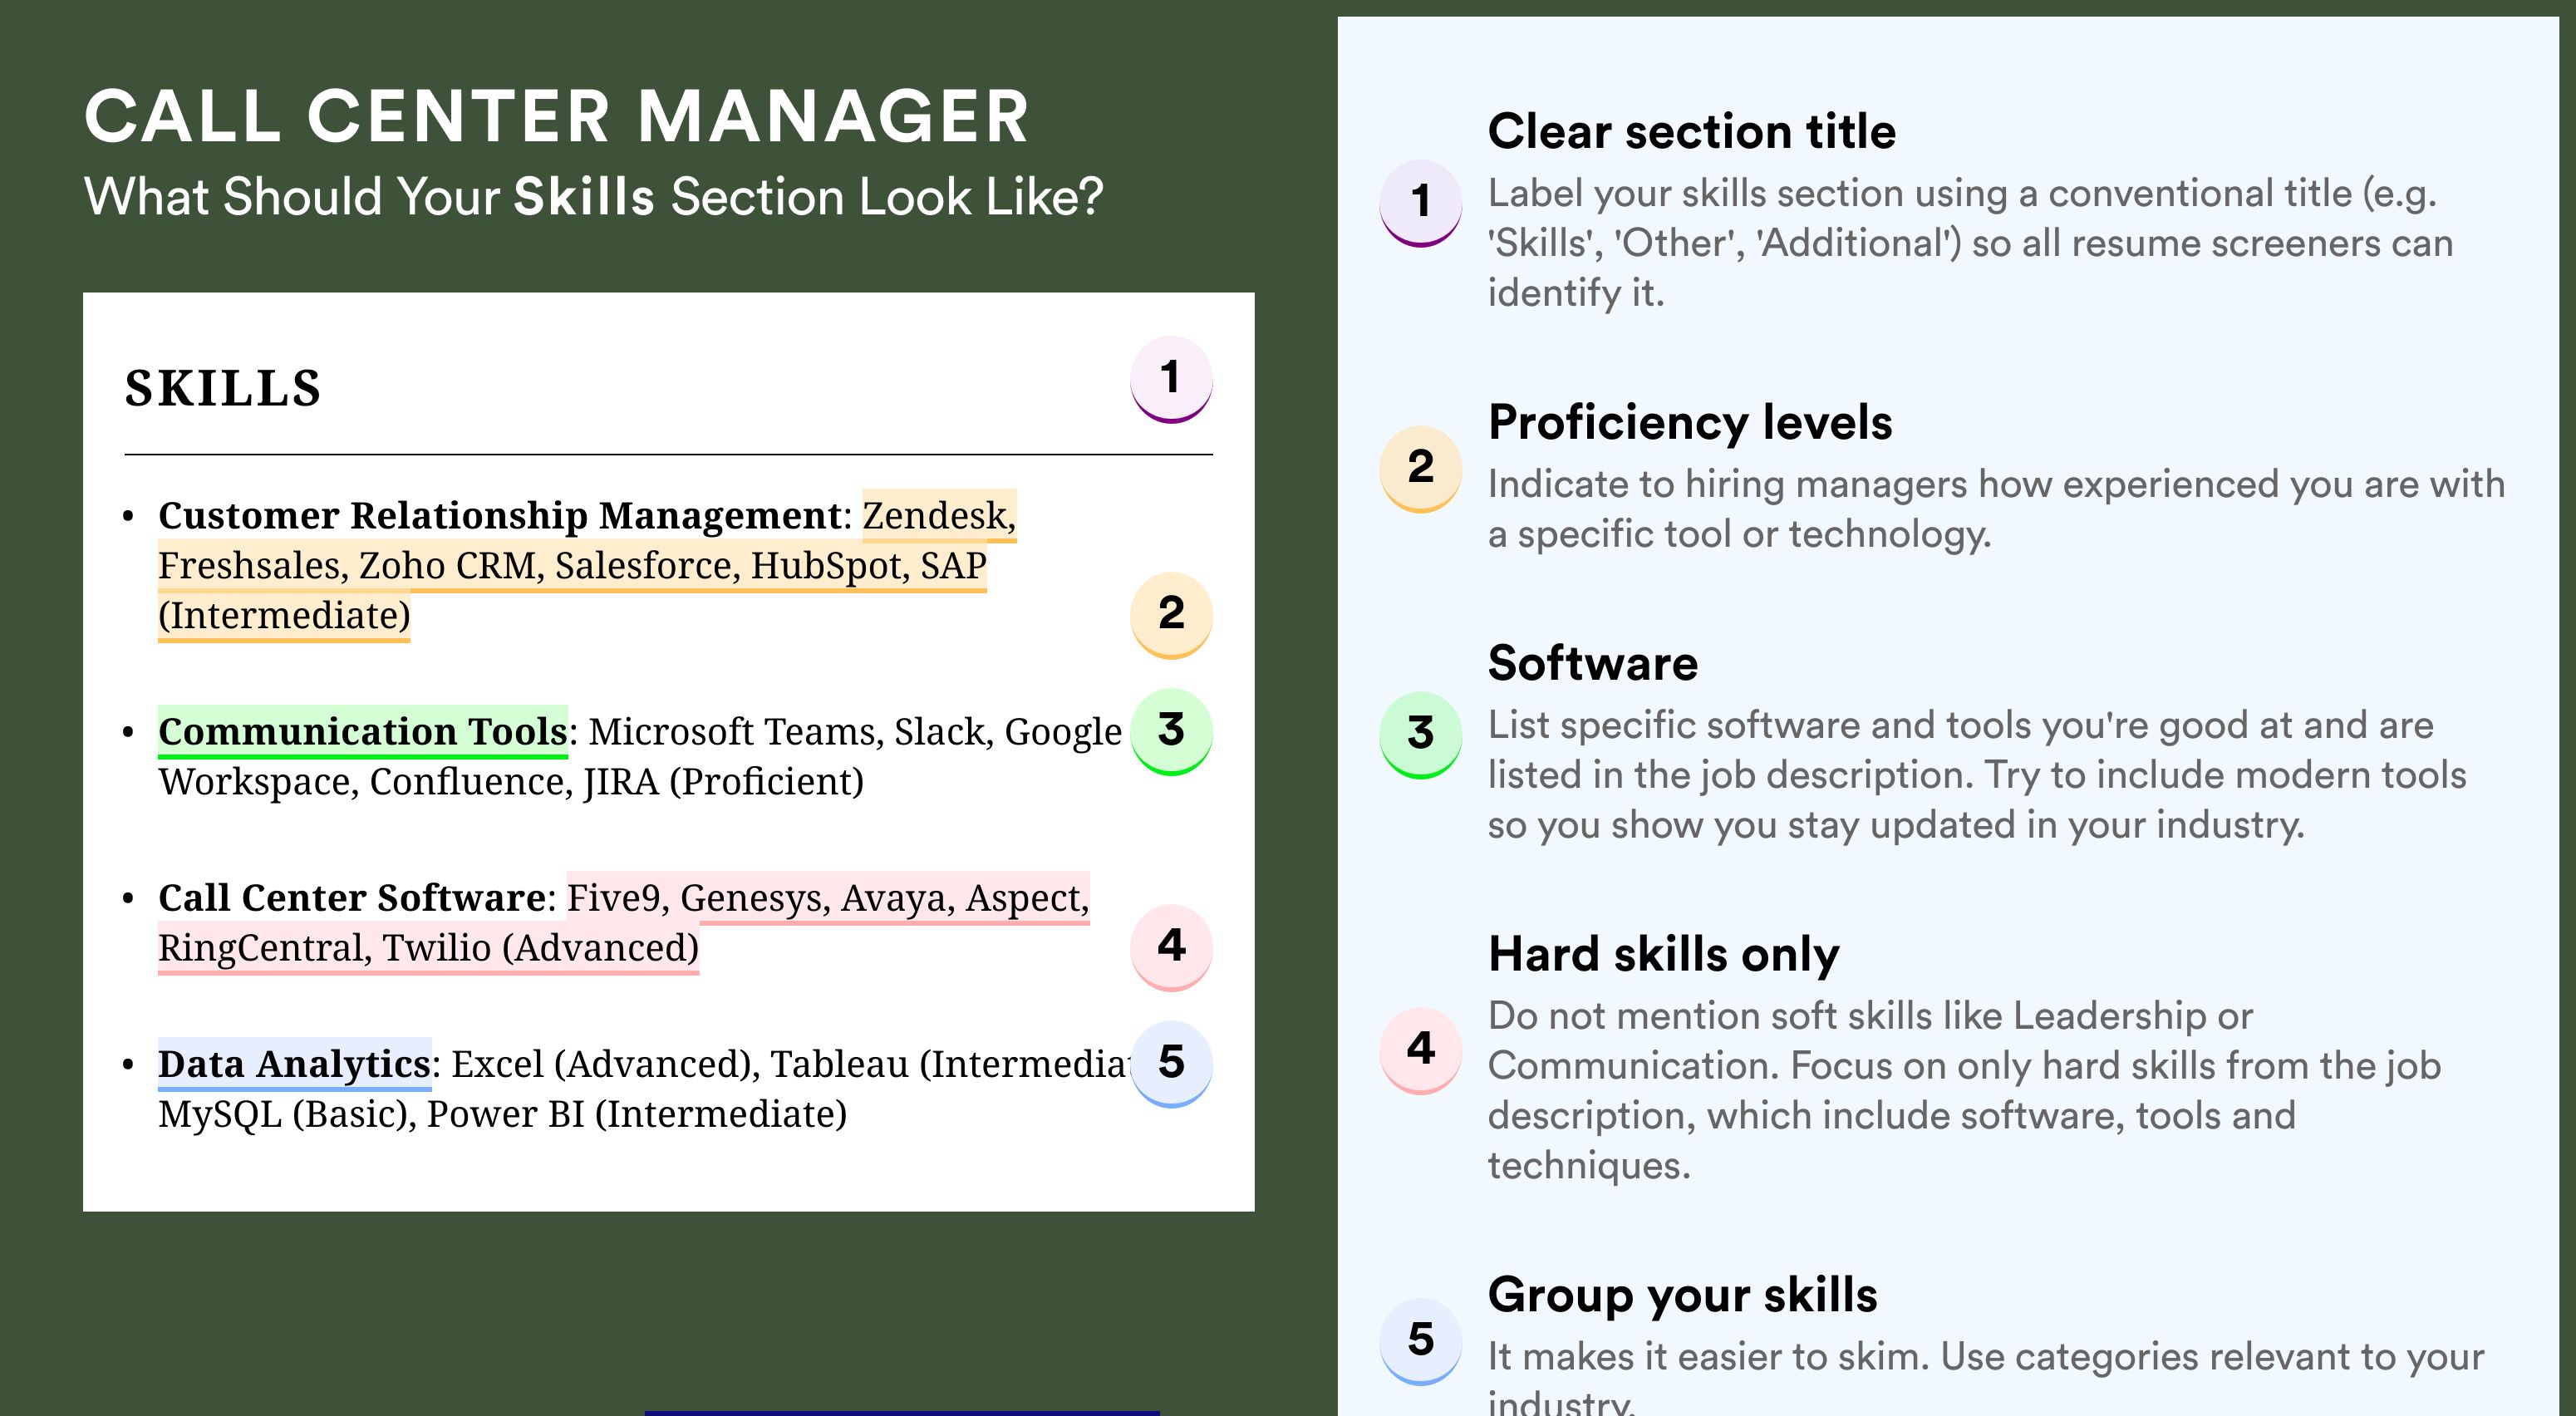 How To Write Your Skills Section - Call Center Manager Roles